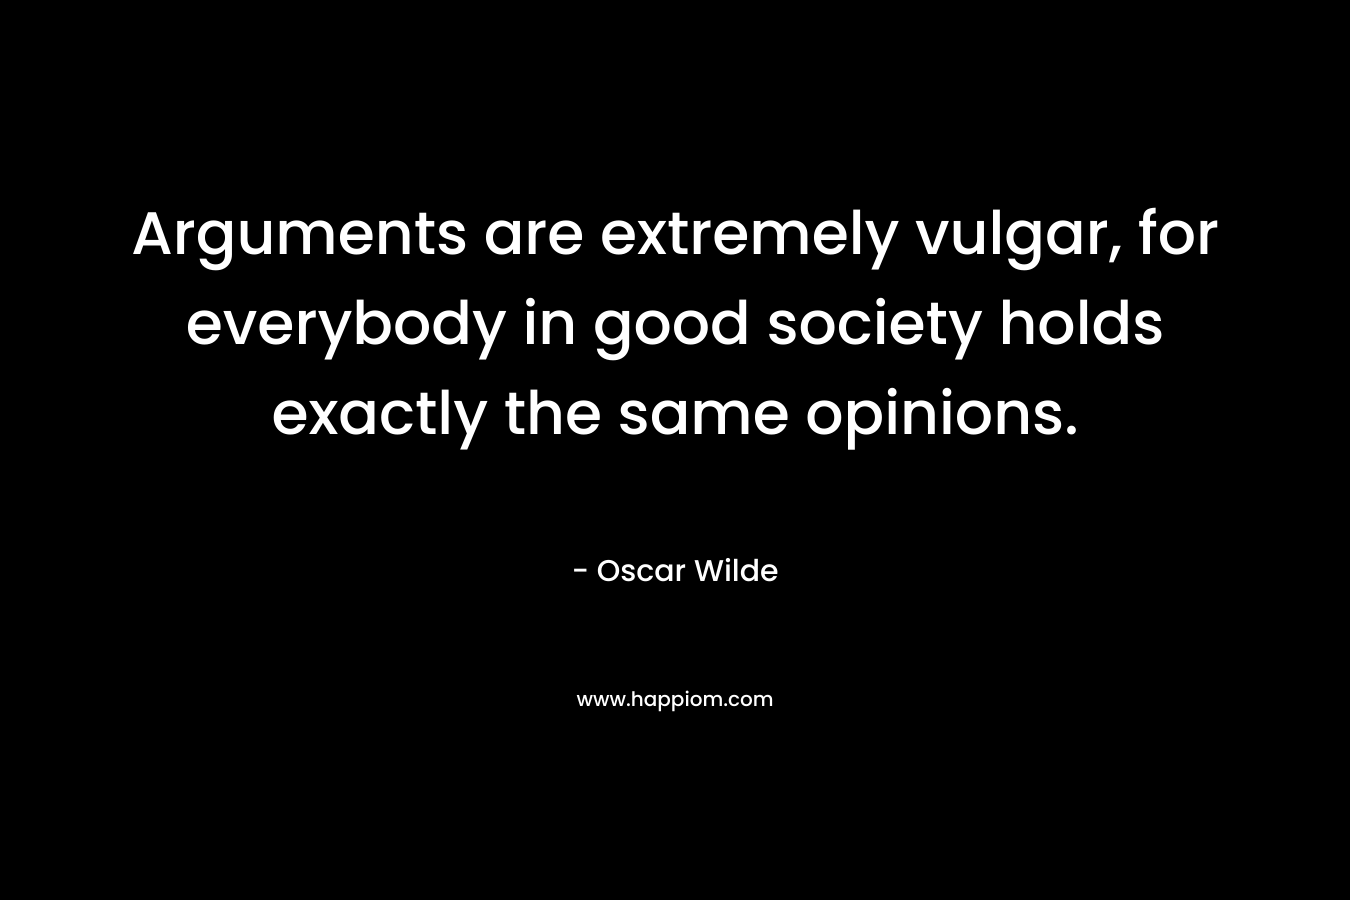 Arguments are extremely vulgar, for everybody in good society holds exactly the same opinions.